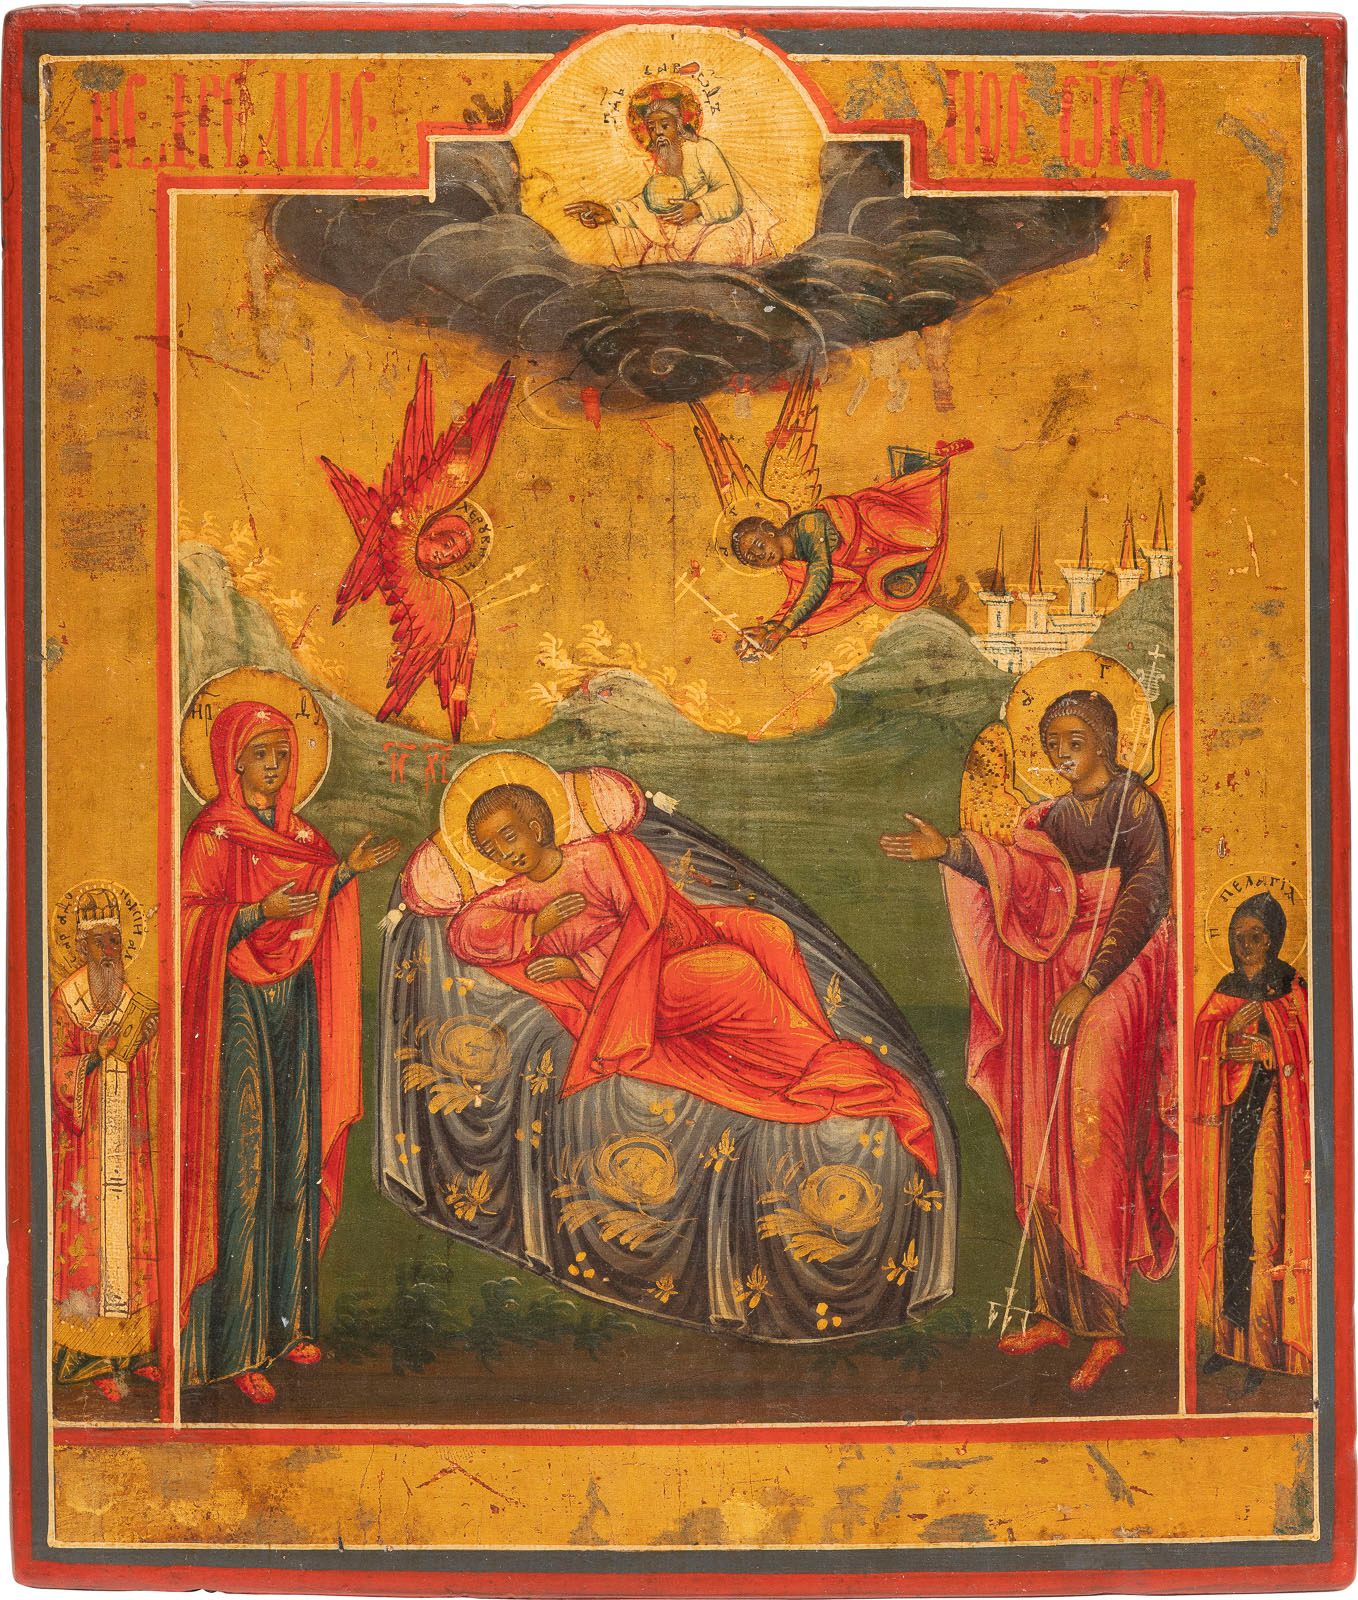 A SMALL ICON SHOWING CHRIST 'THE UNSLEEPING EYE' PICCOLA ICONA CHE MOSTRA CRISTO&hellip;